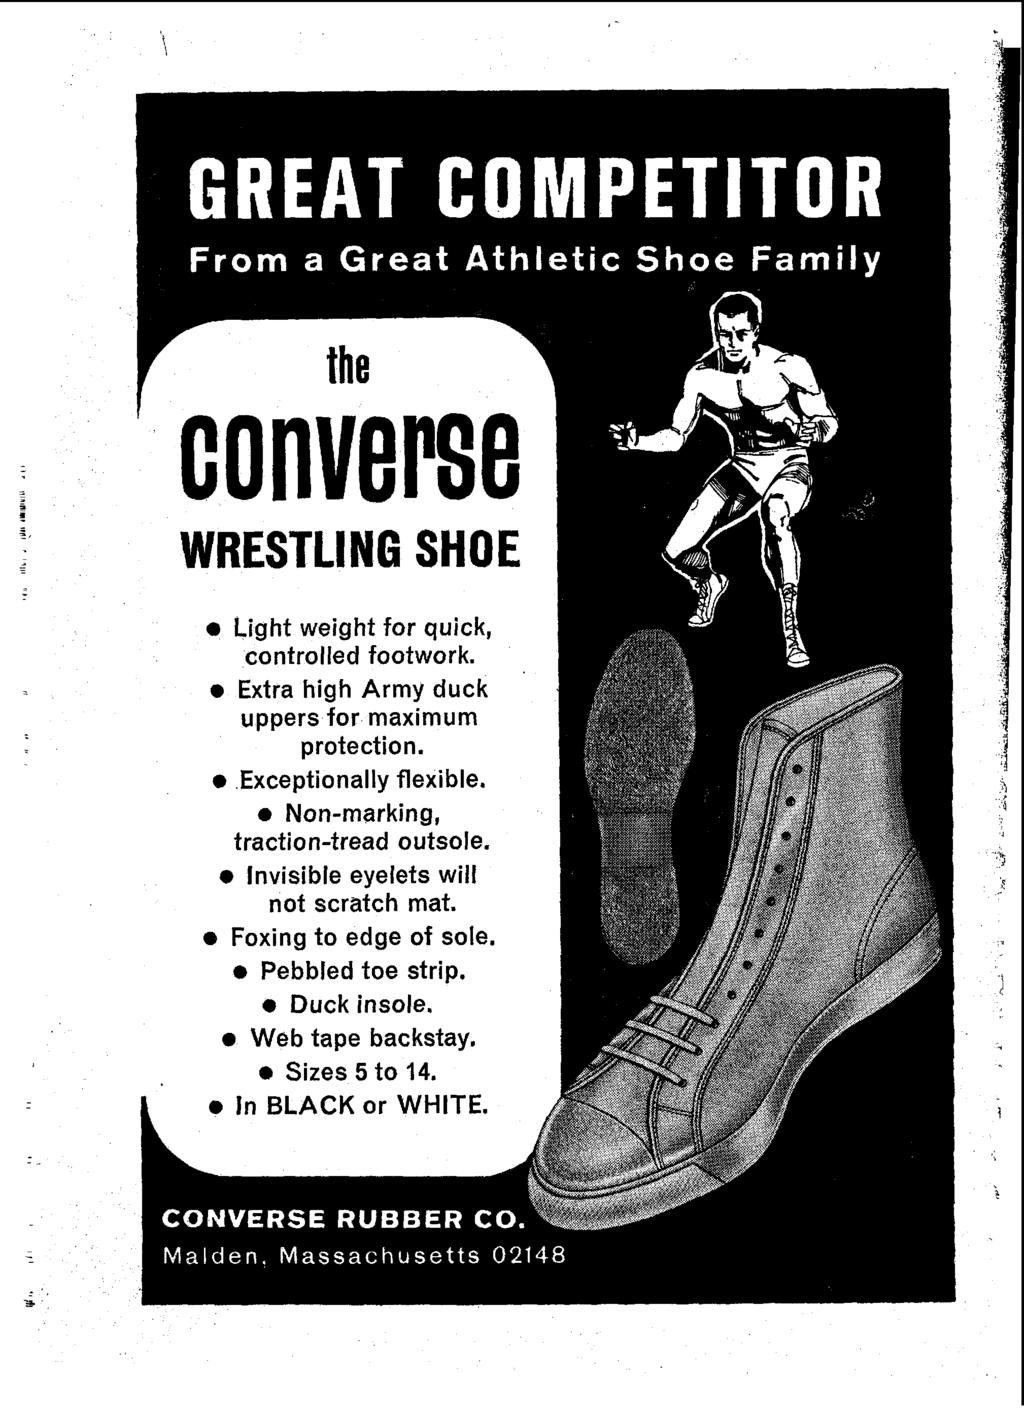 converse WRESTLING SHOE & Light weight for quick, controlled footwork. 0 Extra high Army duck uppers for maximum protection. 0 Exceptionally flexible.